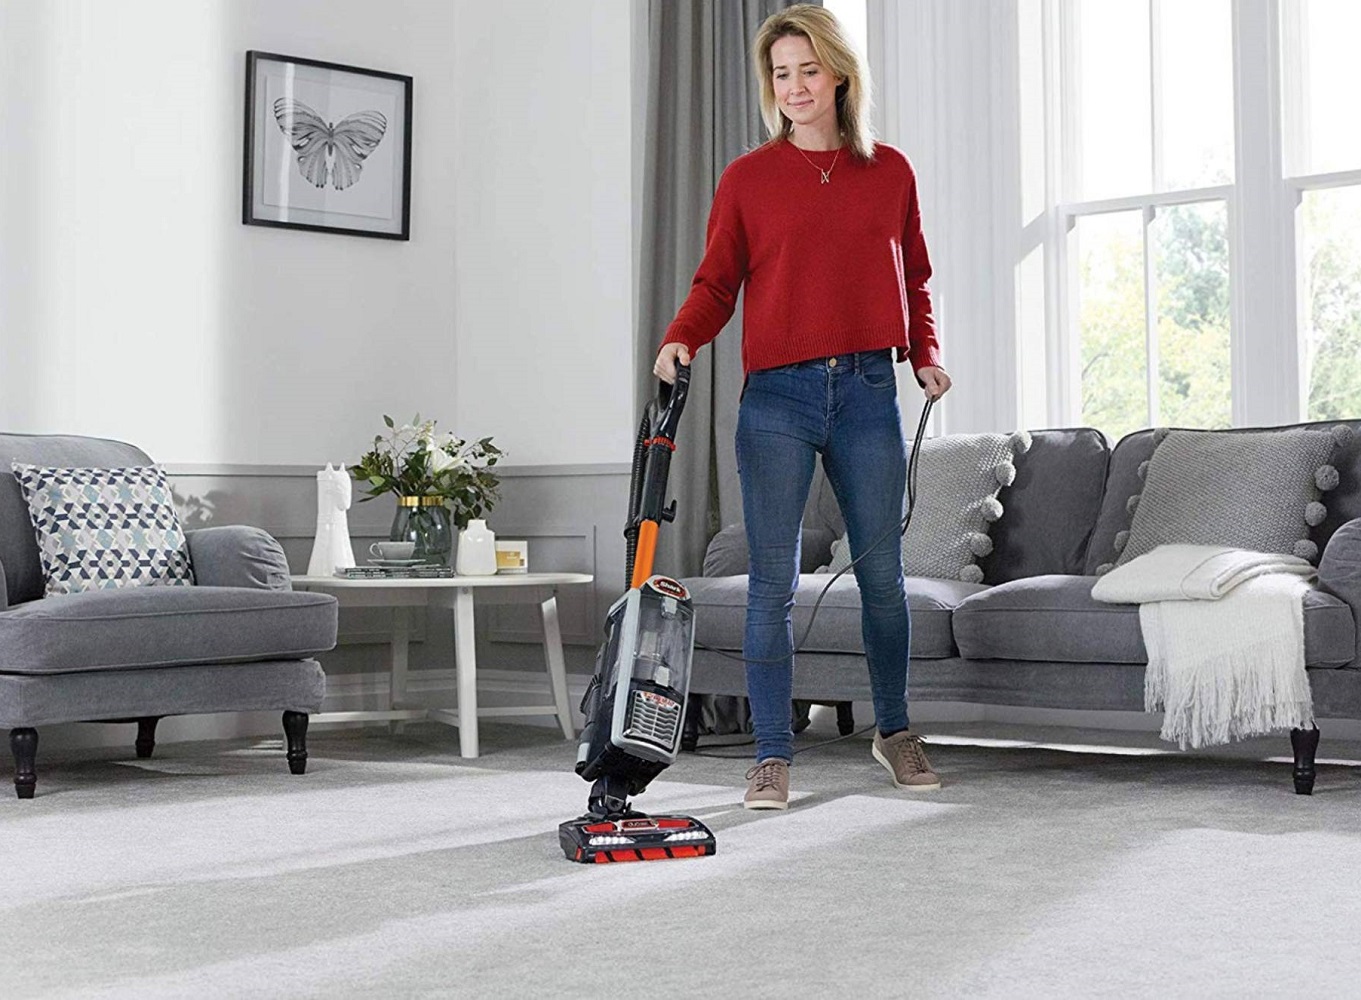 7 Best Upright Vacuum Cleaners for August 2022 | Check Reviews